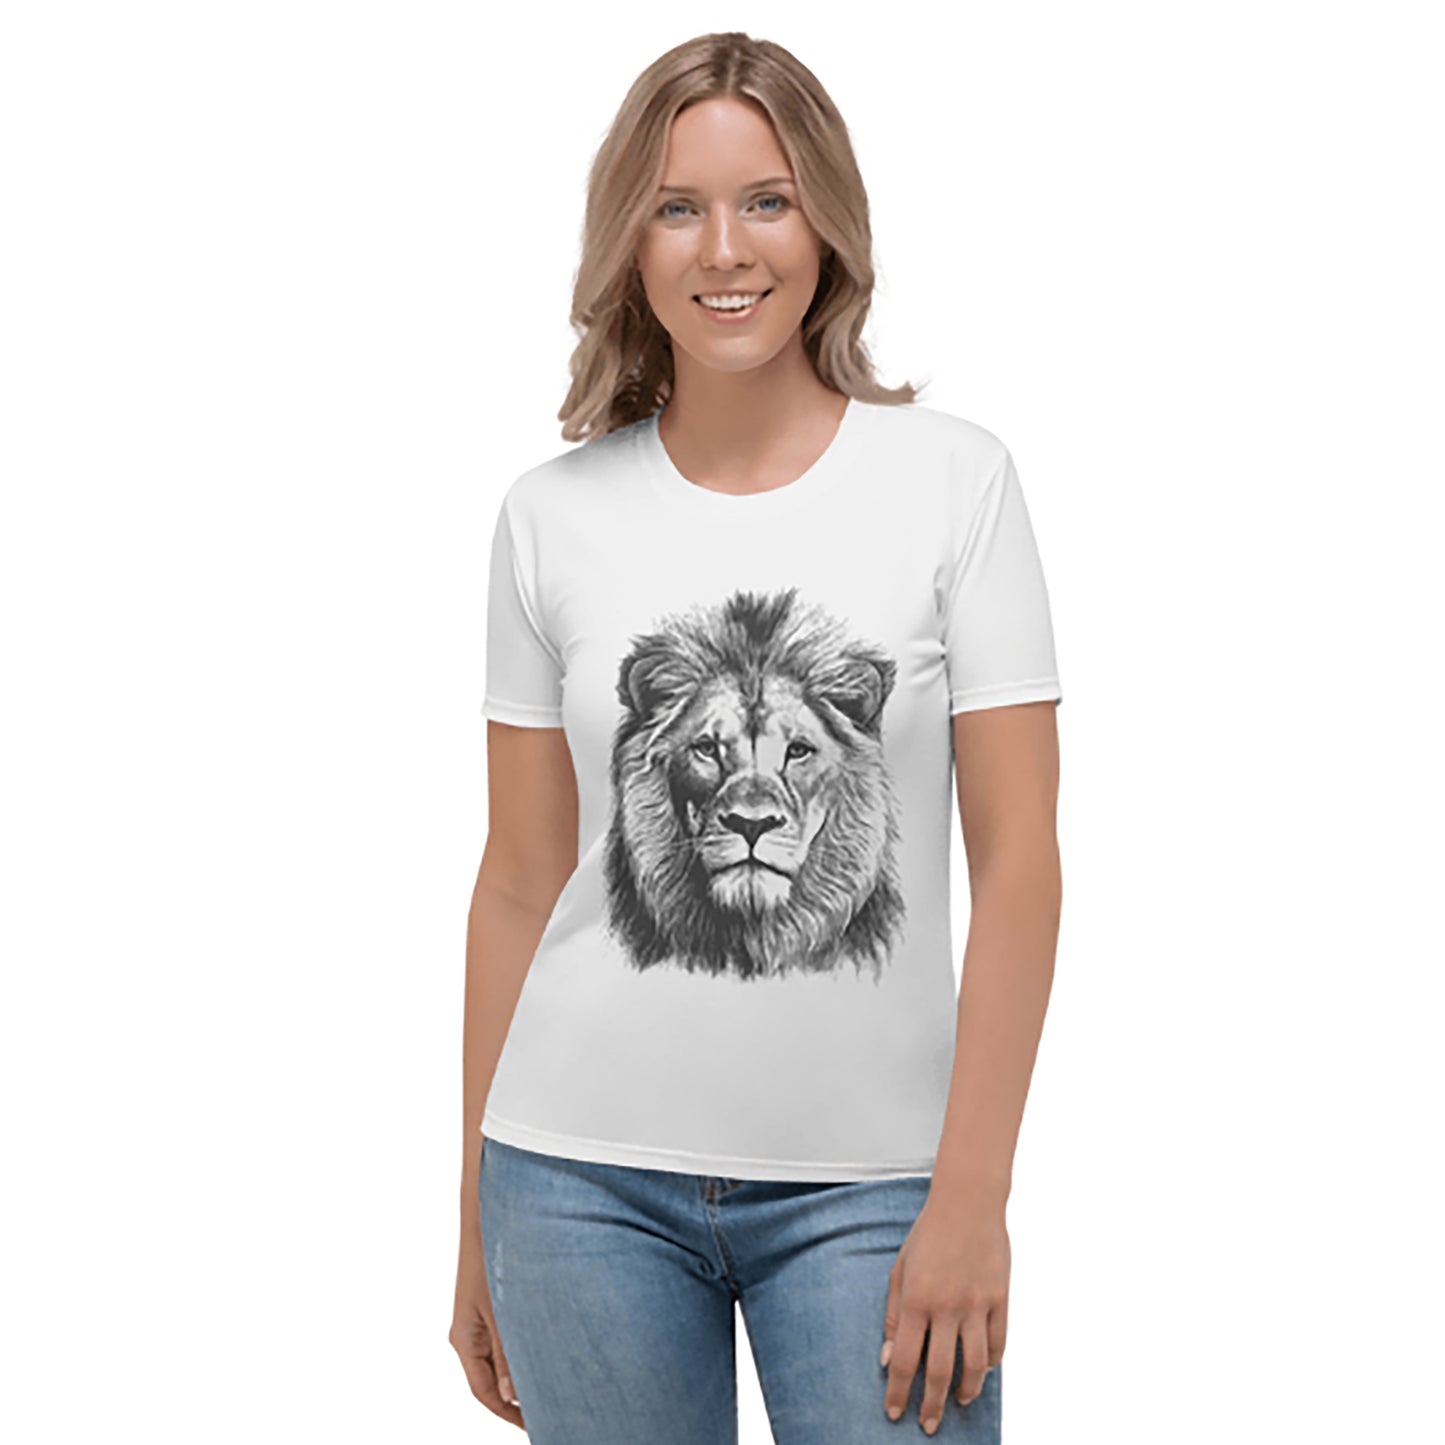 Women and Men's (Unisex) T-Shirts printed with a portrait of a lion